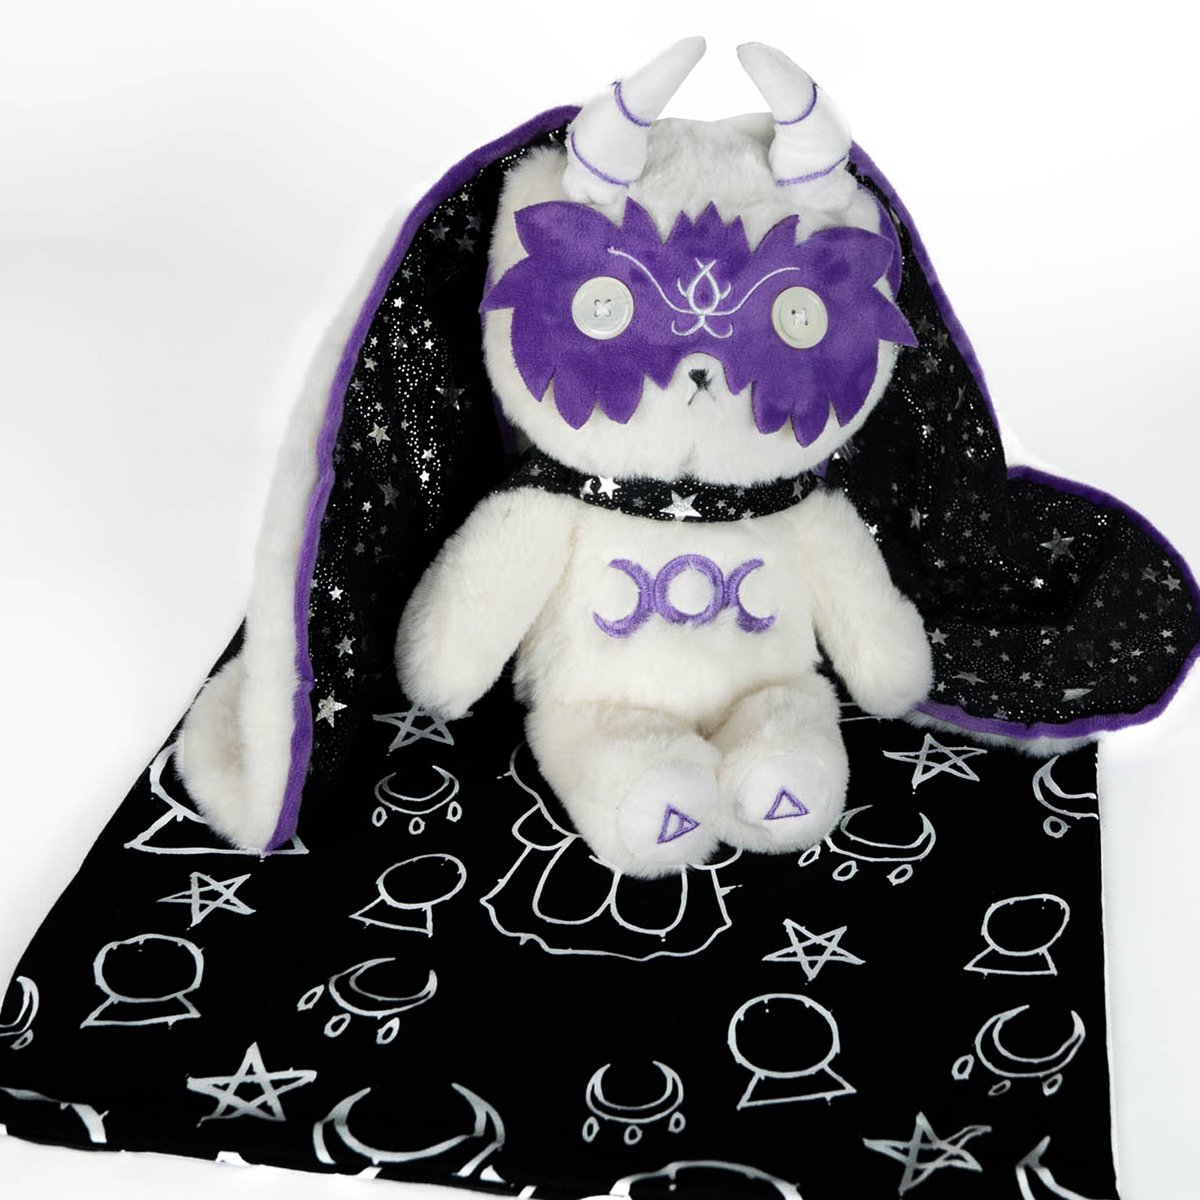 We are the weirdos, mister! #wicca #witchy #witchtwt 

One of our fastest selling plushies get yours before they're gone! 🧹🧹🧹
mysterious.americanmcgee.com/products/plush…